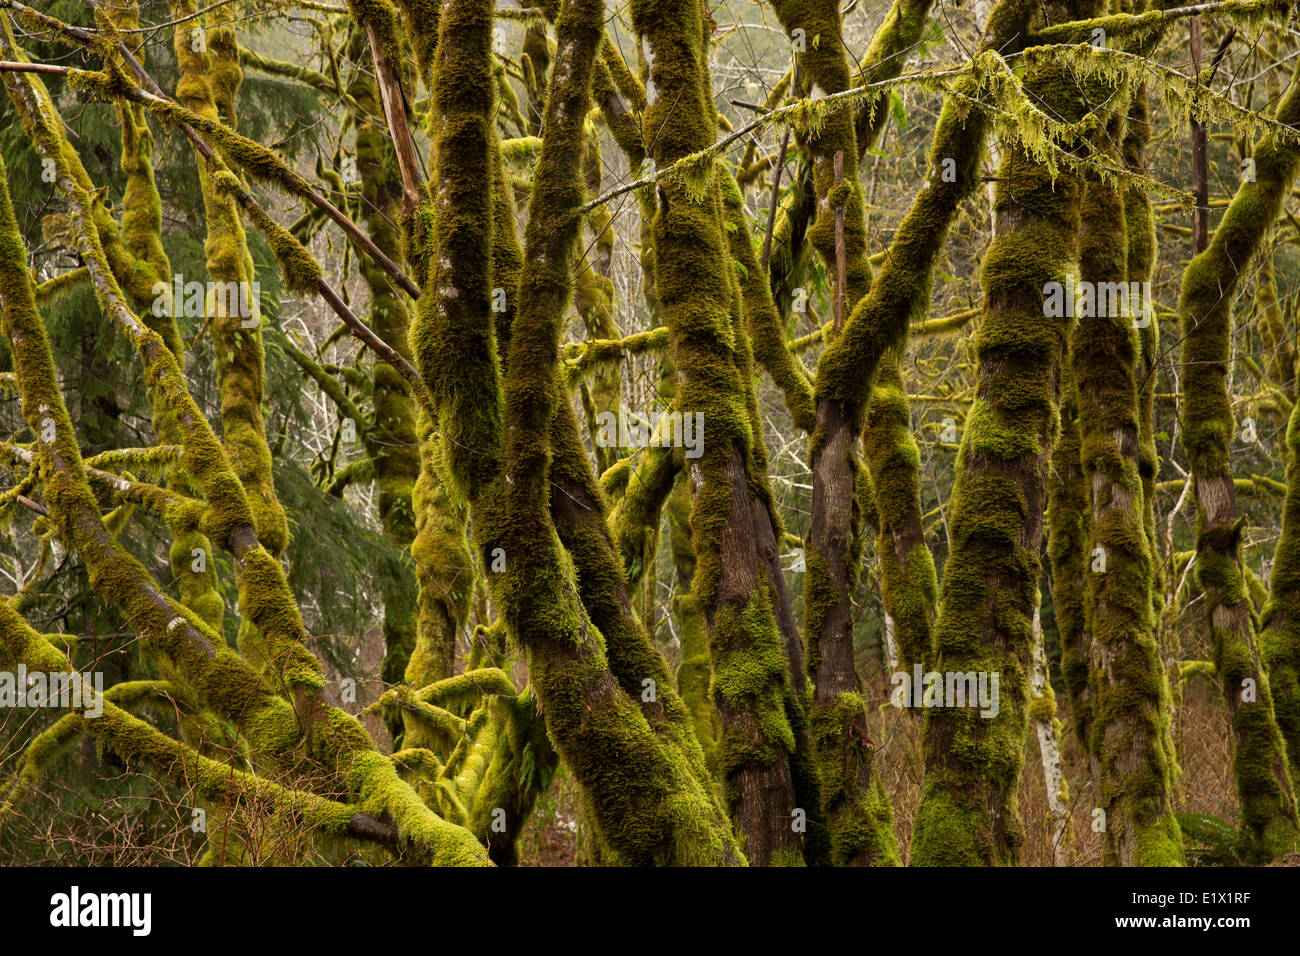 Moss covered alder trees in the temperature forests of Vancouver Island, Canada. Stock Photo